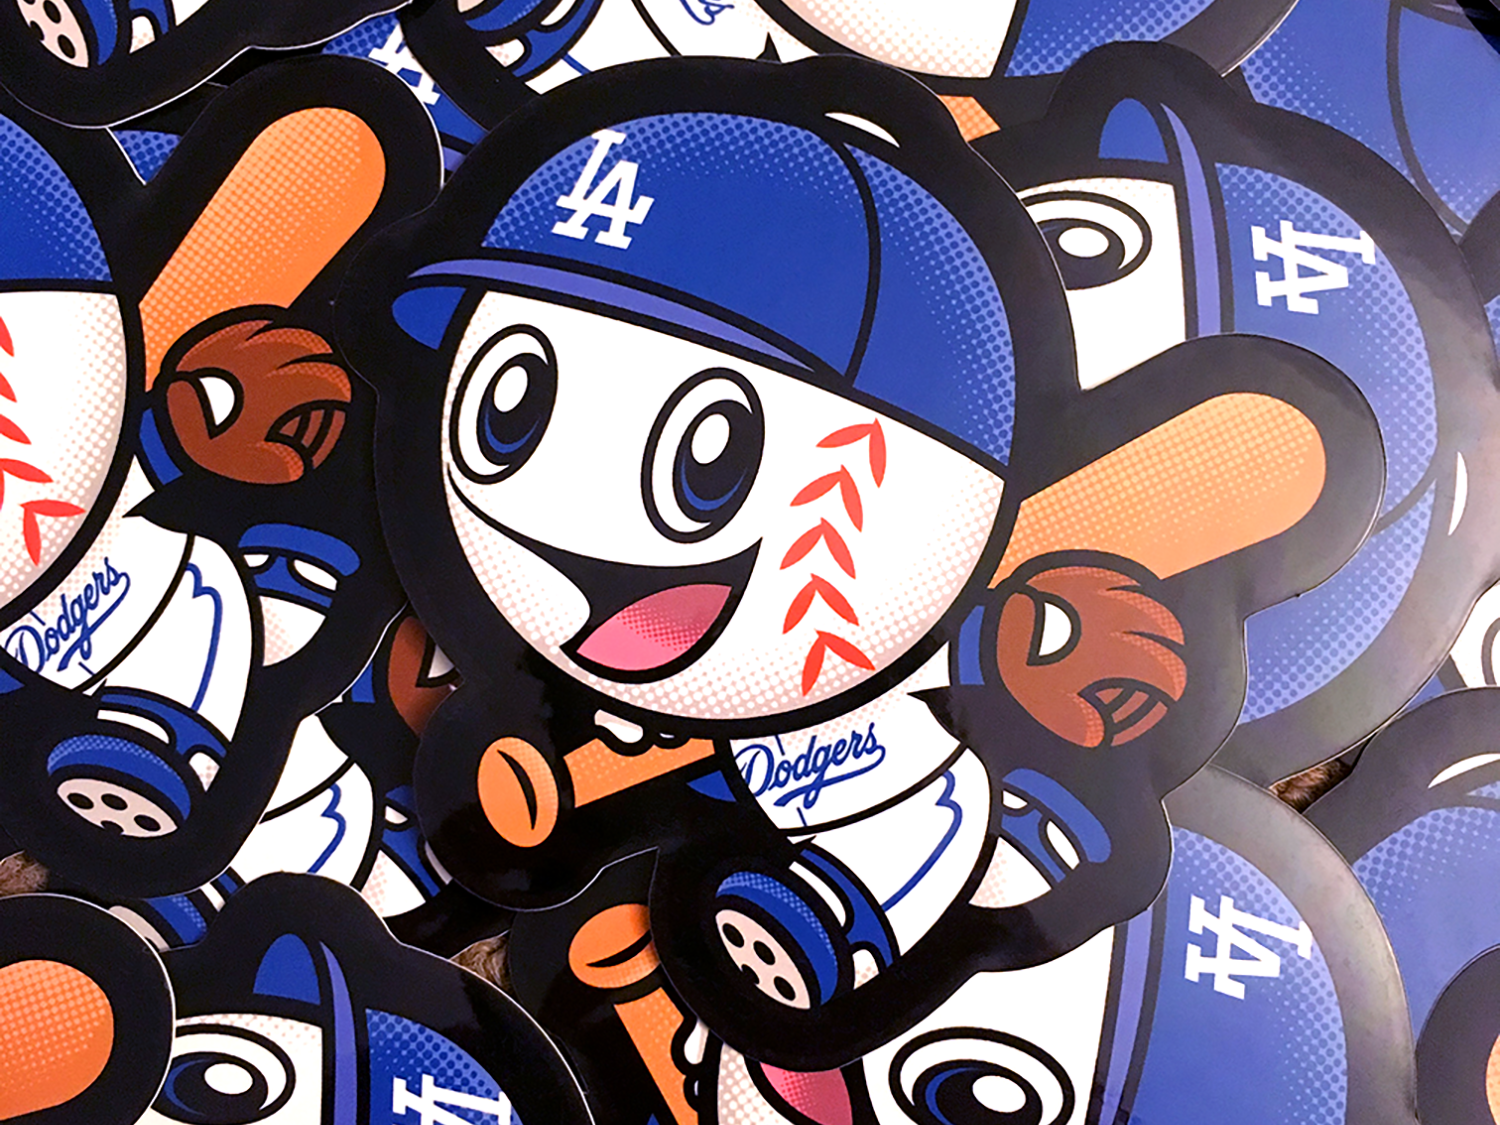 Mr. Dodger by Ryan Hungerford on Dribbble